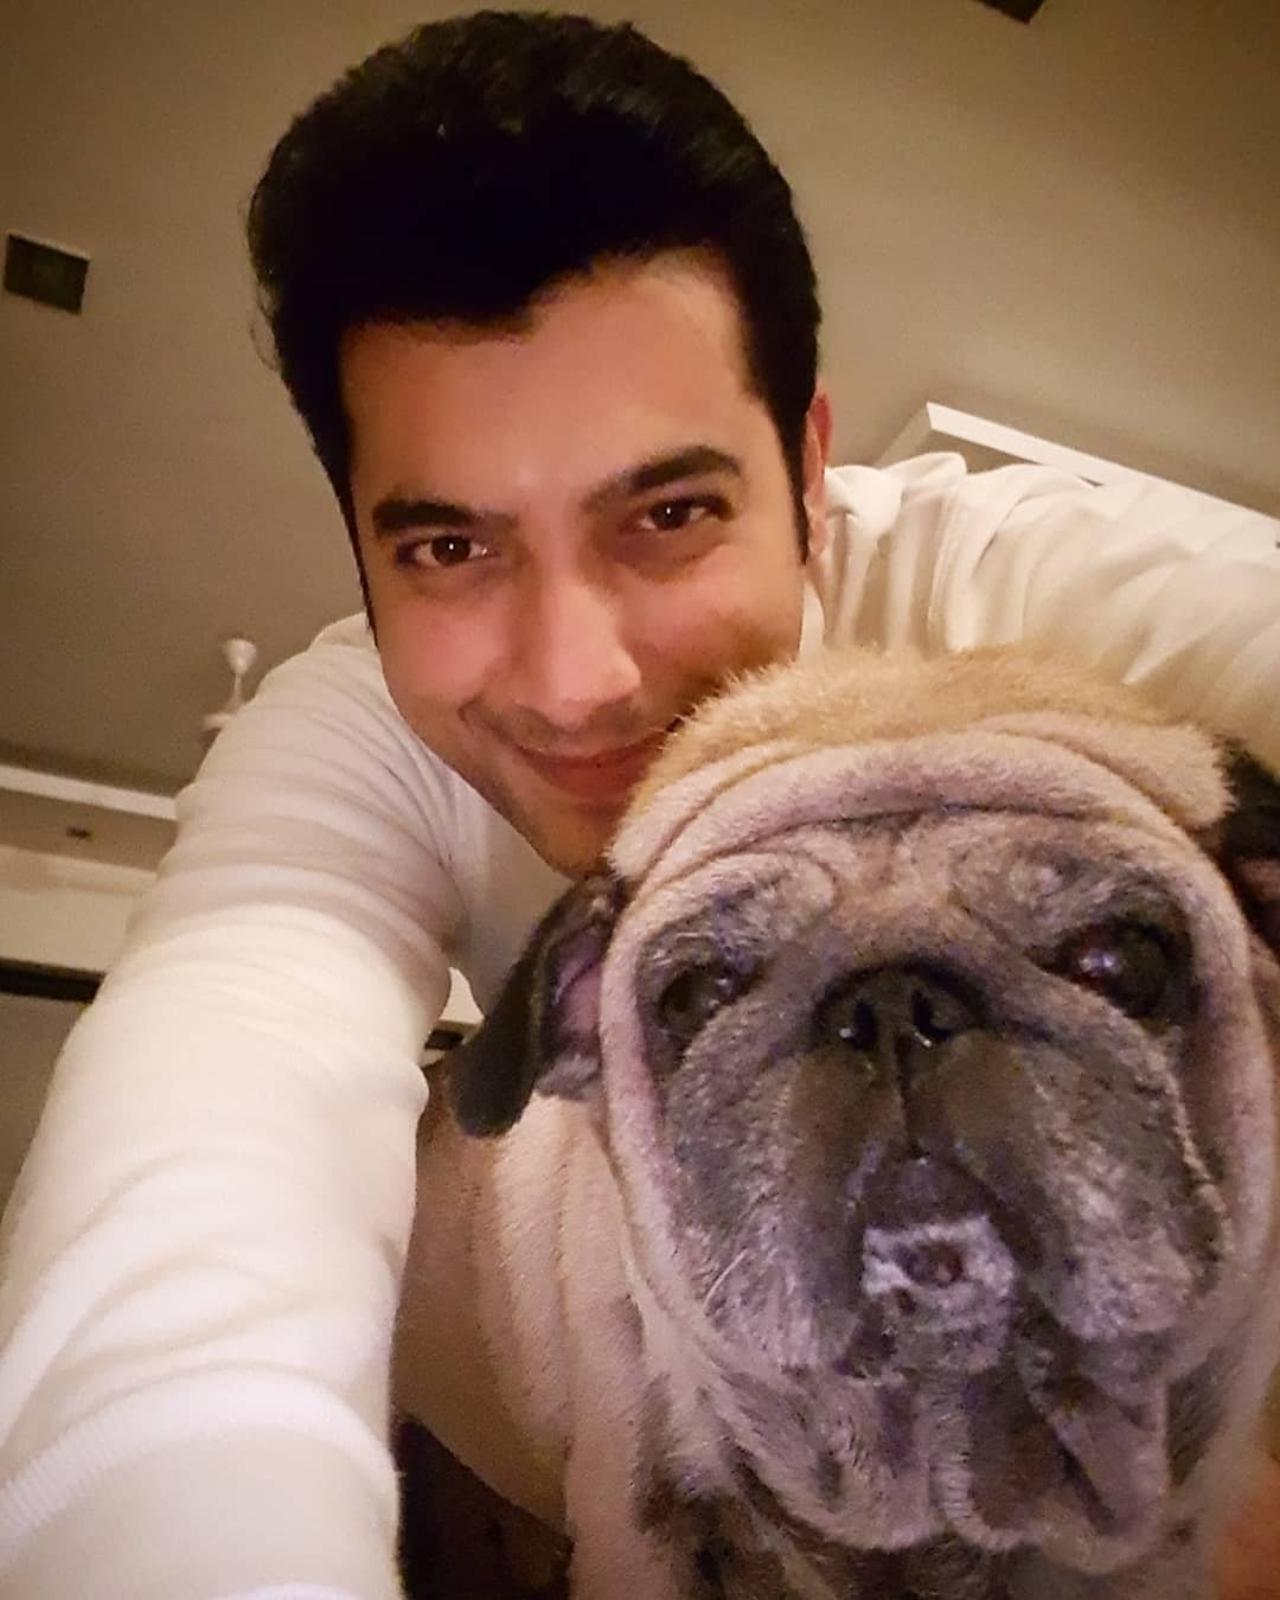 Sharad Malhotra
Sharad Malhotra took immense pride in being a devoted pet parent to his beloved furry friend, Musky. With affection and care, Sharad showered Musky with love, ensuring the adorable pet feels cherished and protected. On social media, he has often heartwarming glimpses of their bond in the past, reflecting the joy and happiness they bring to each other's lives